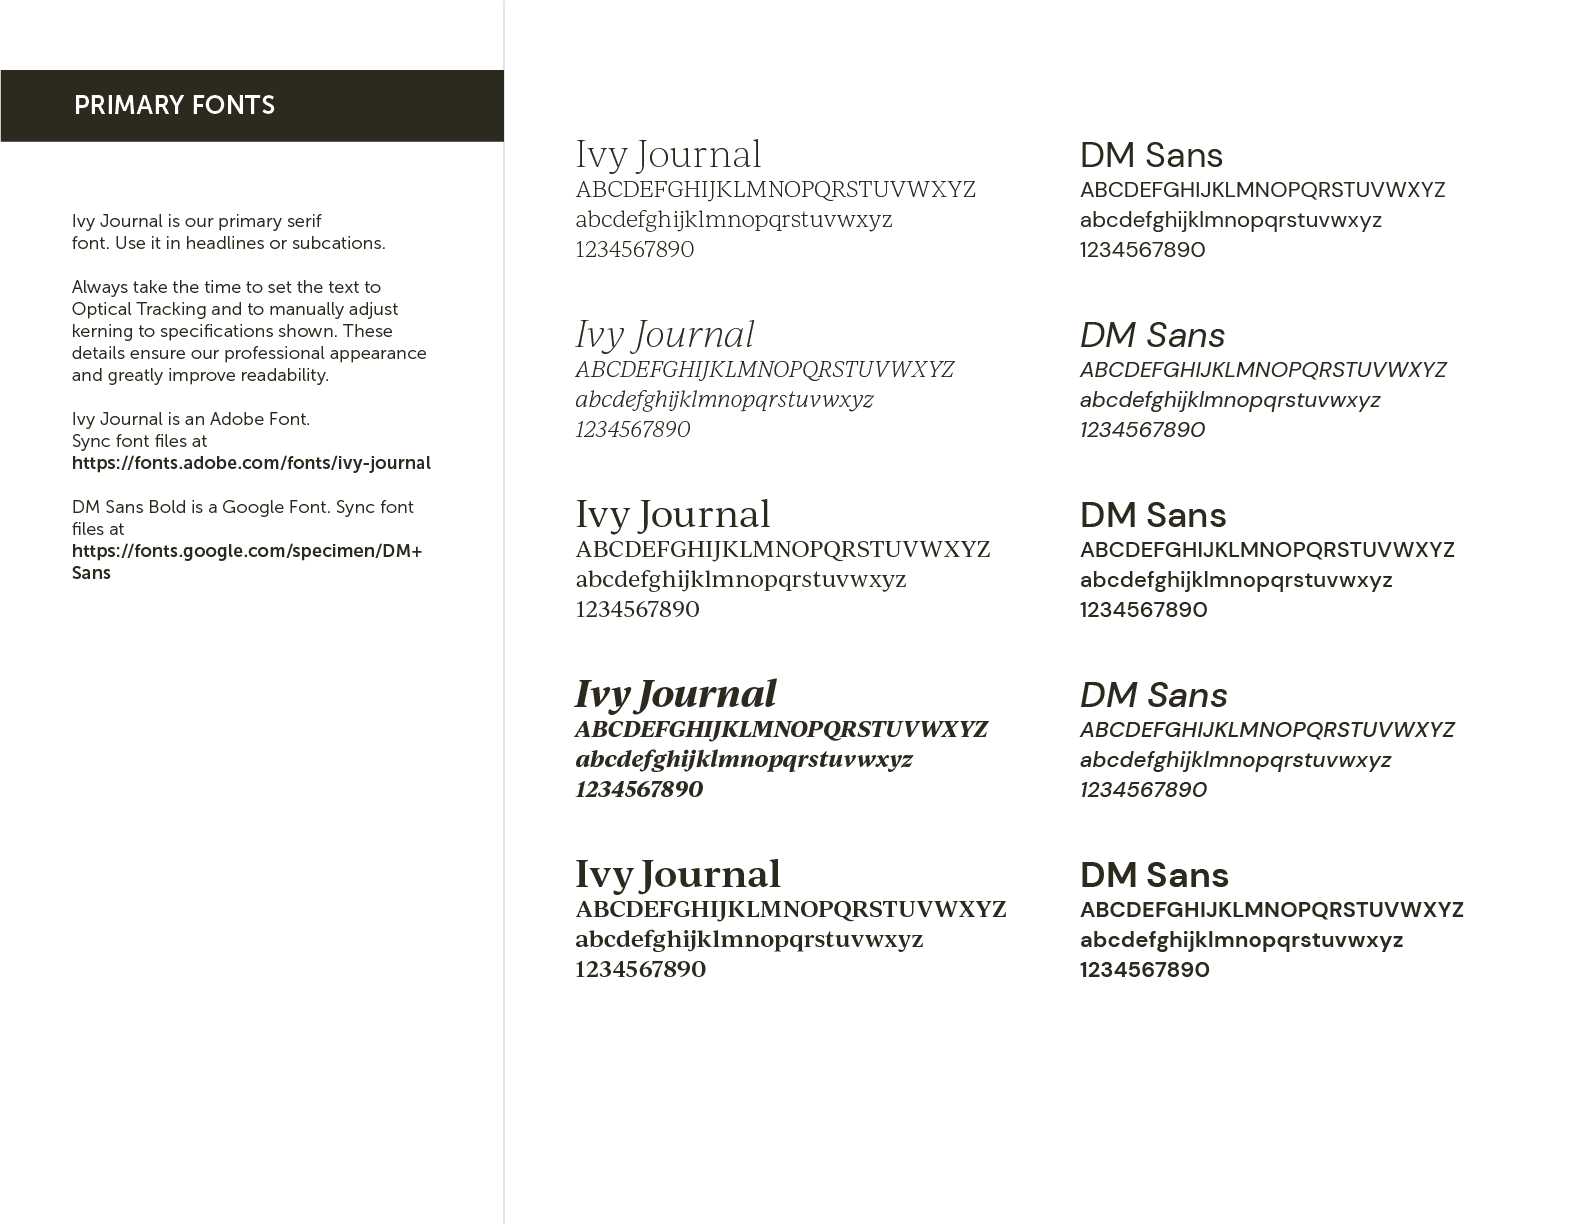 Brodstone Healthcare Brand Guide Primary Fonts